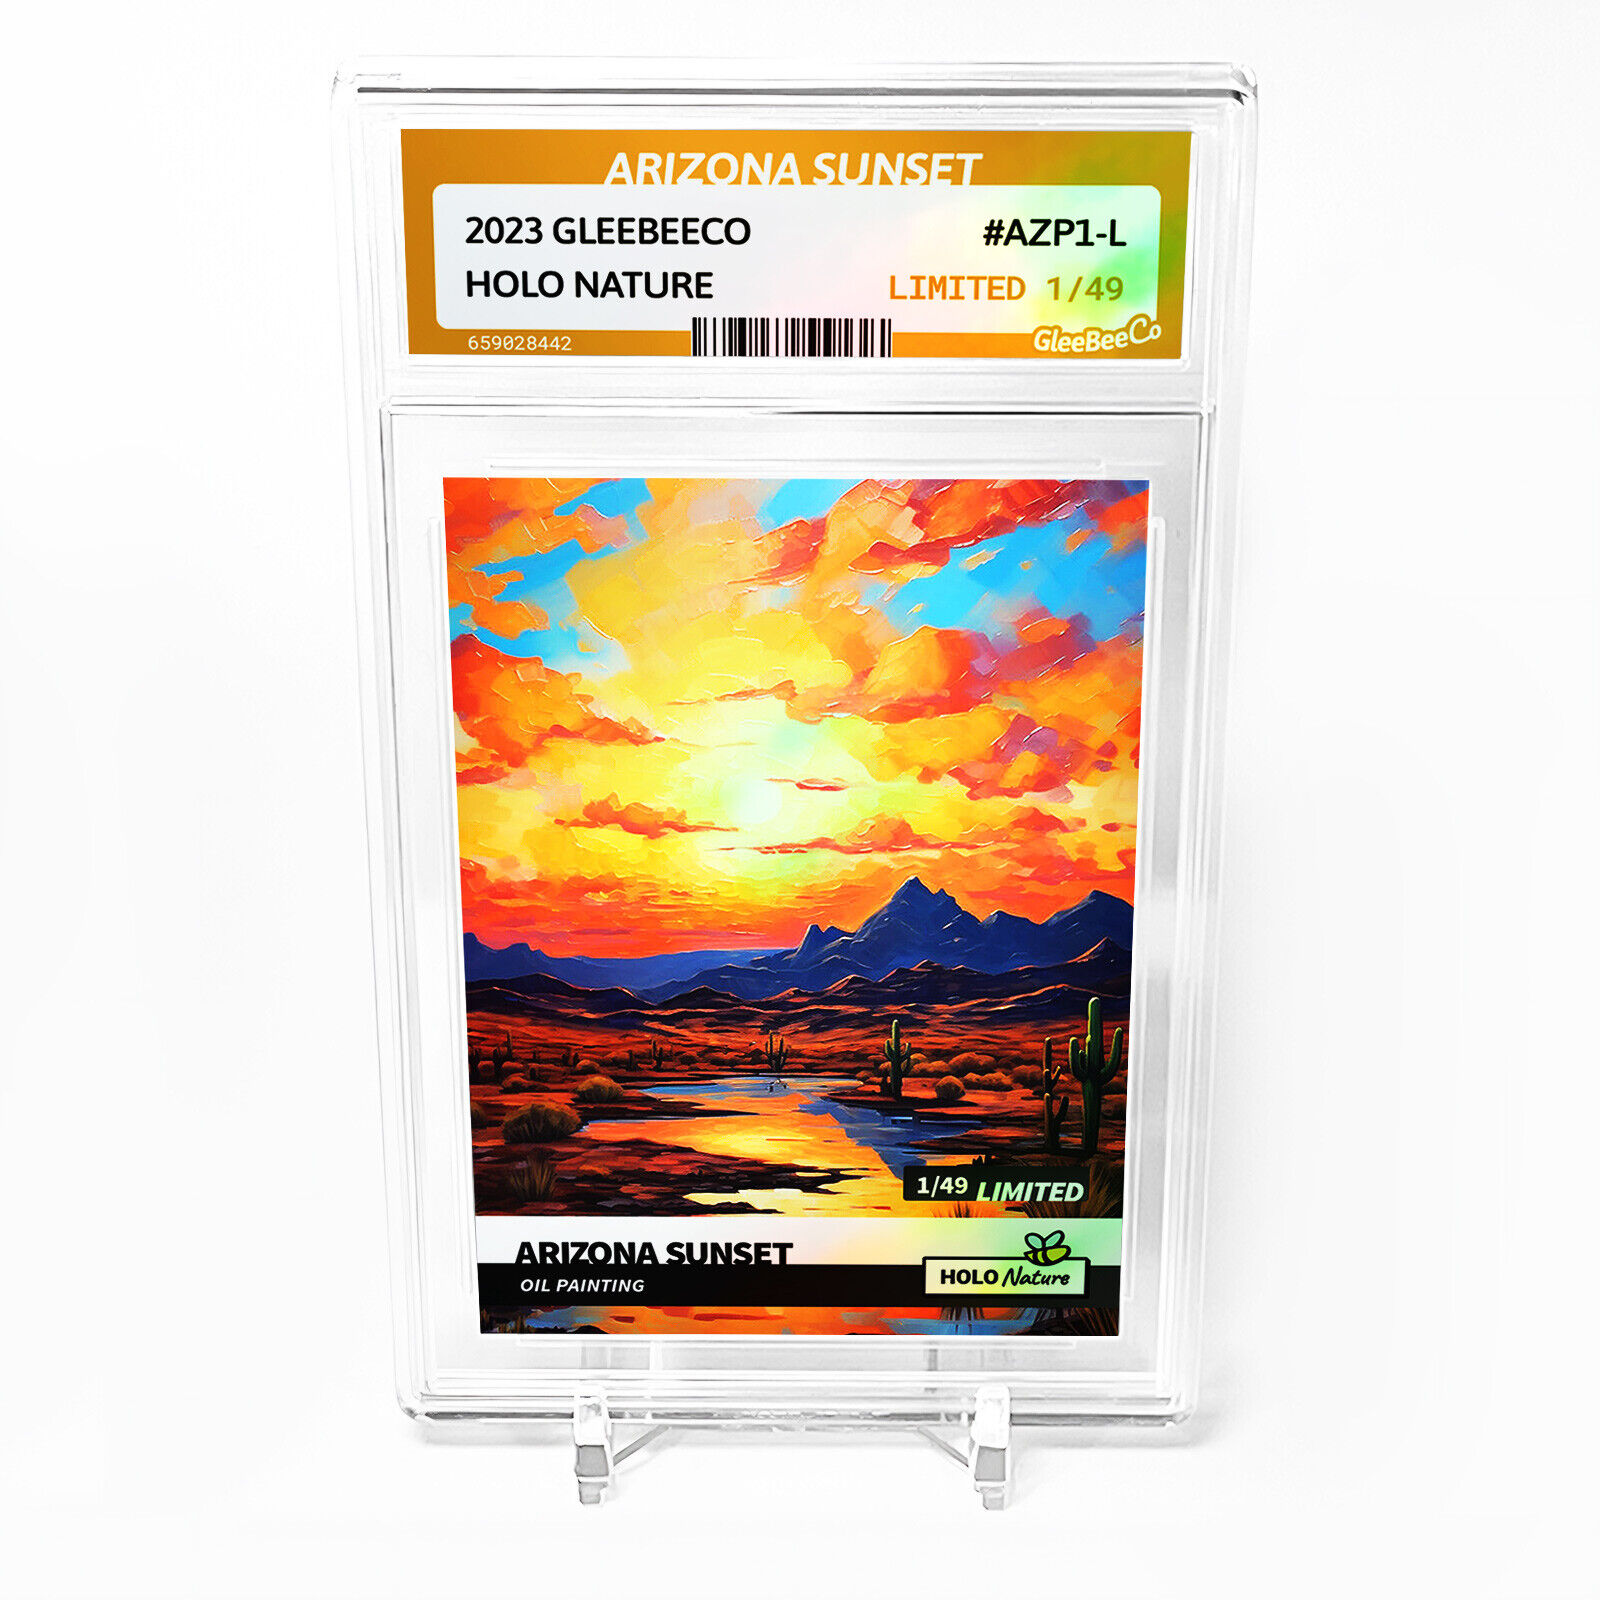 ARIZONA SUNSET Card 2023 GleeBeeCo Holo Nature #AZP1-L Limited to Only /49